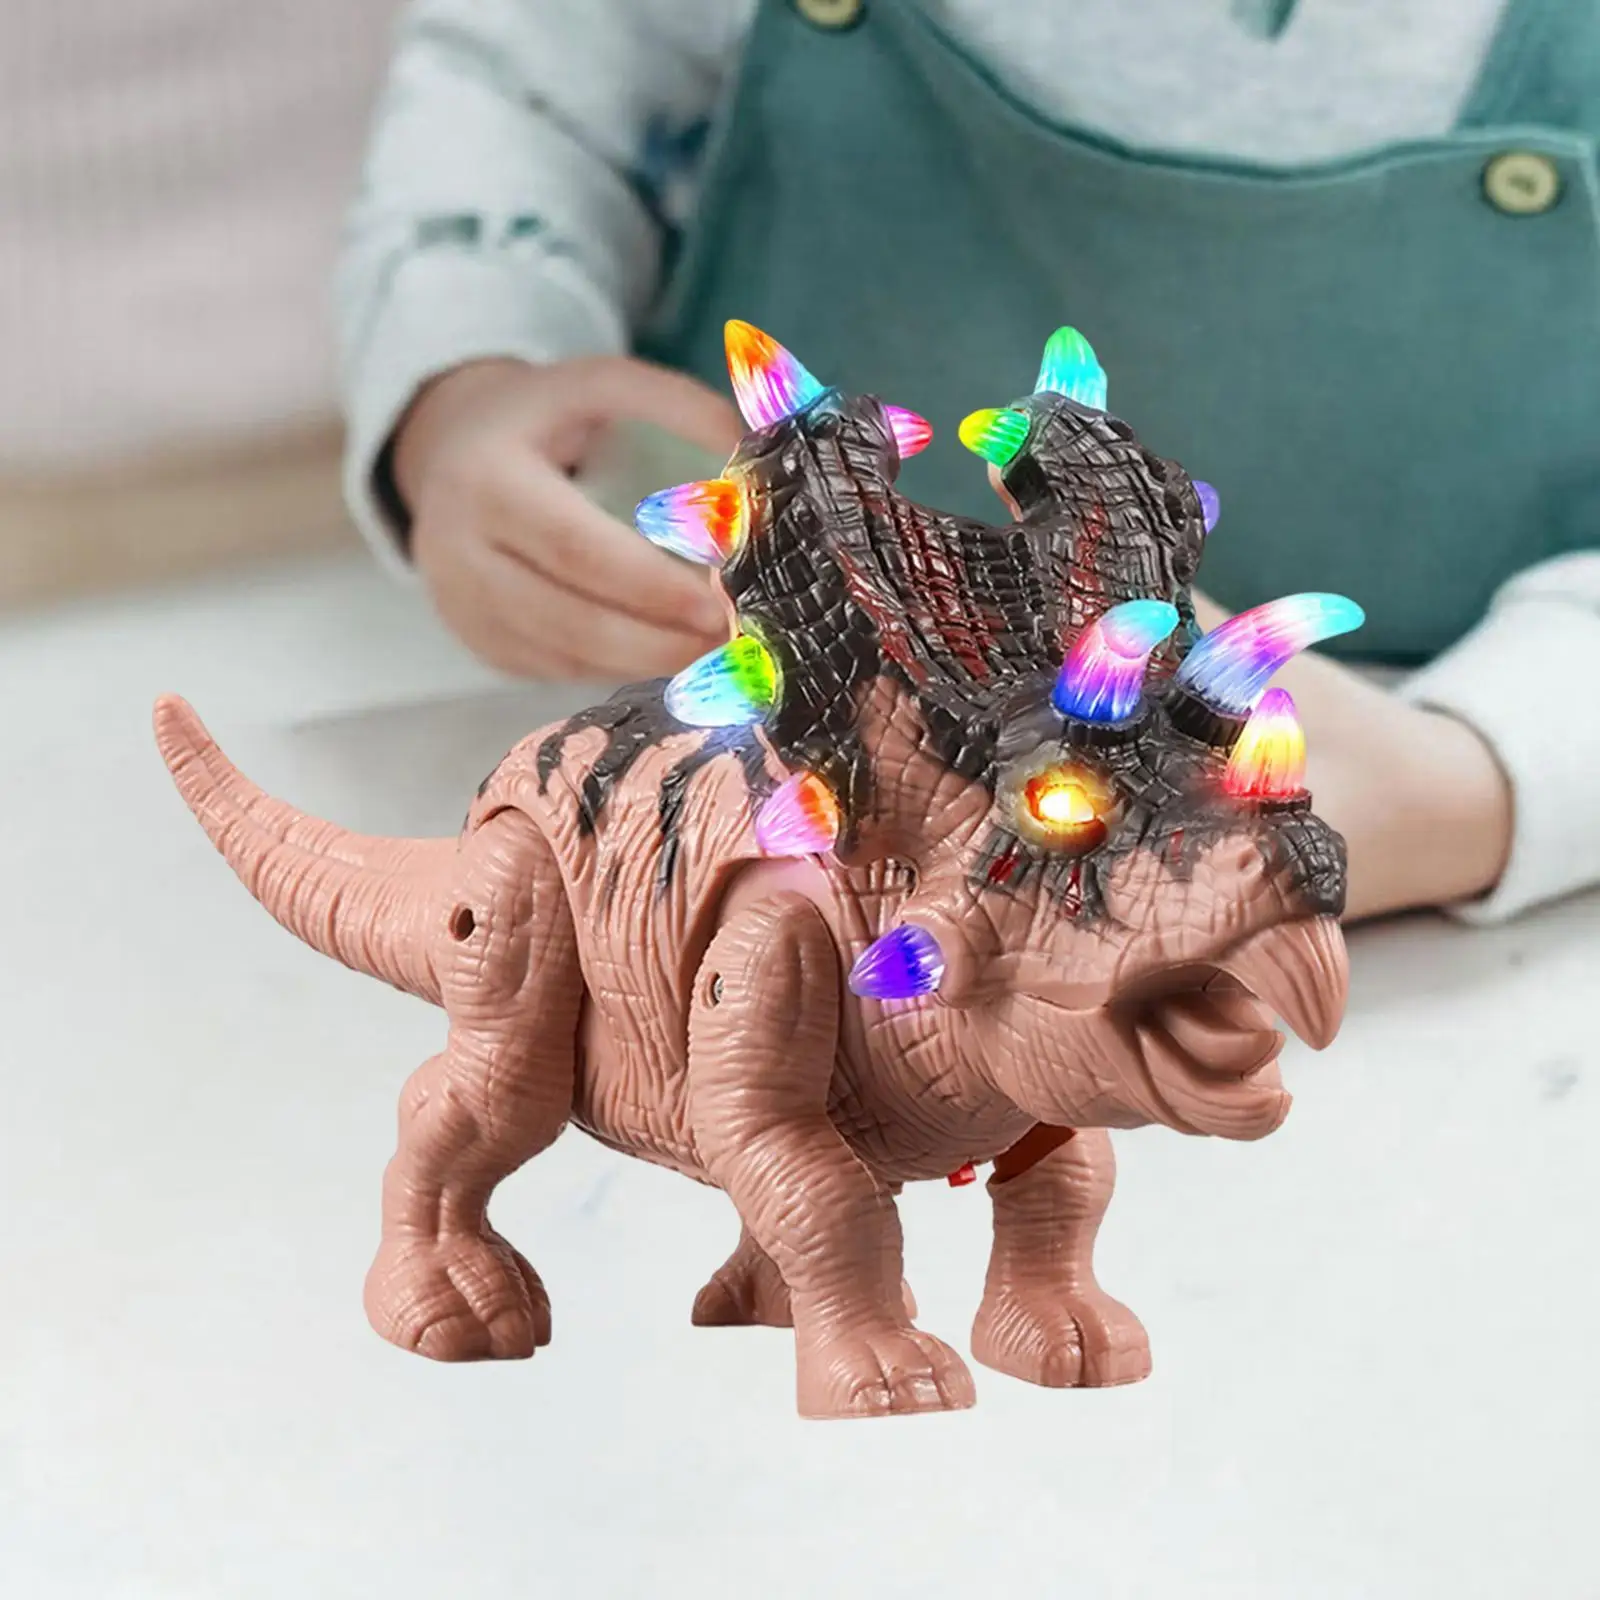 Simulation Electric Dinosaur Toys with LED Lights for Girls Birthday Gifts